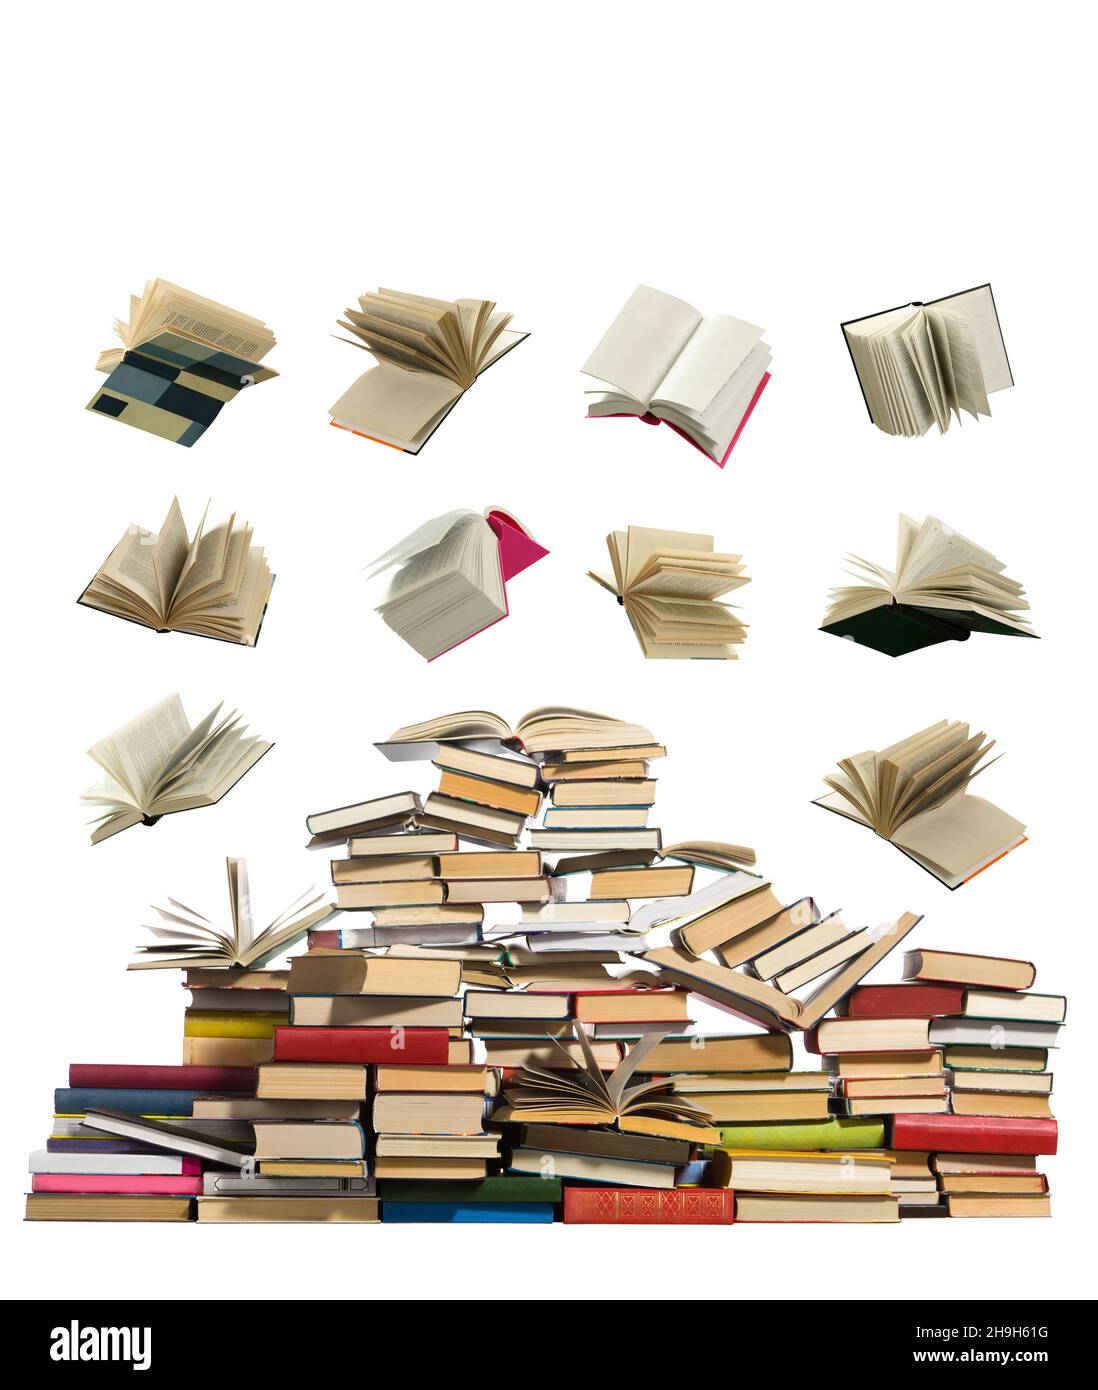 Books falling on a large pile of books on a white background. Stock Photo